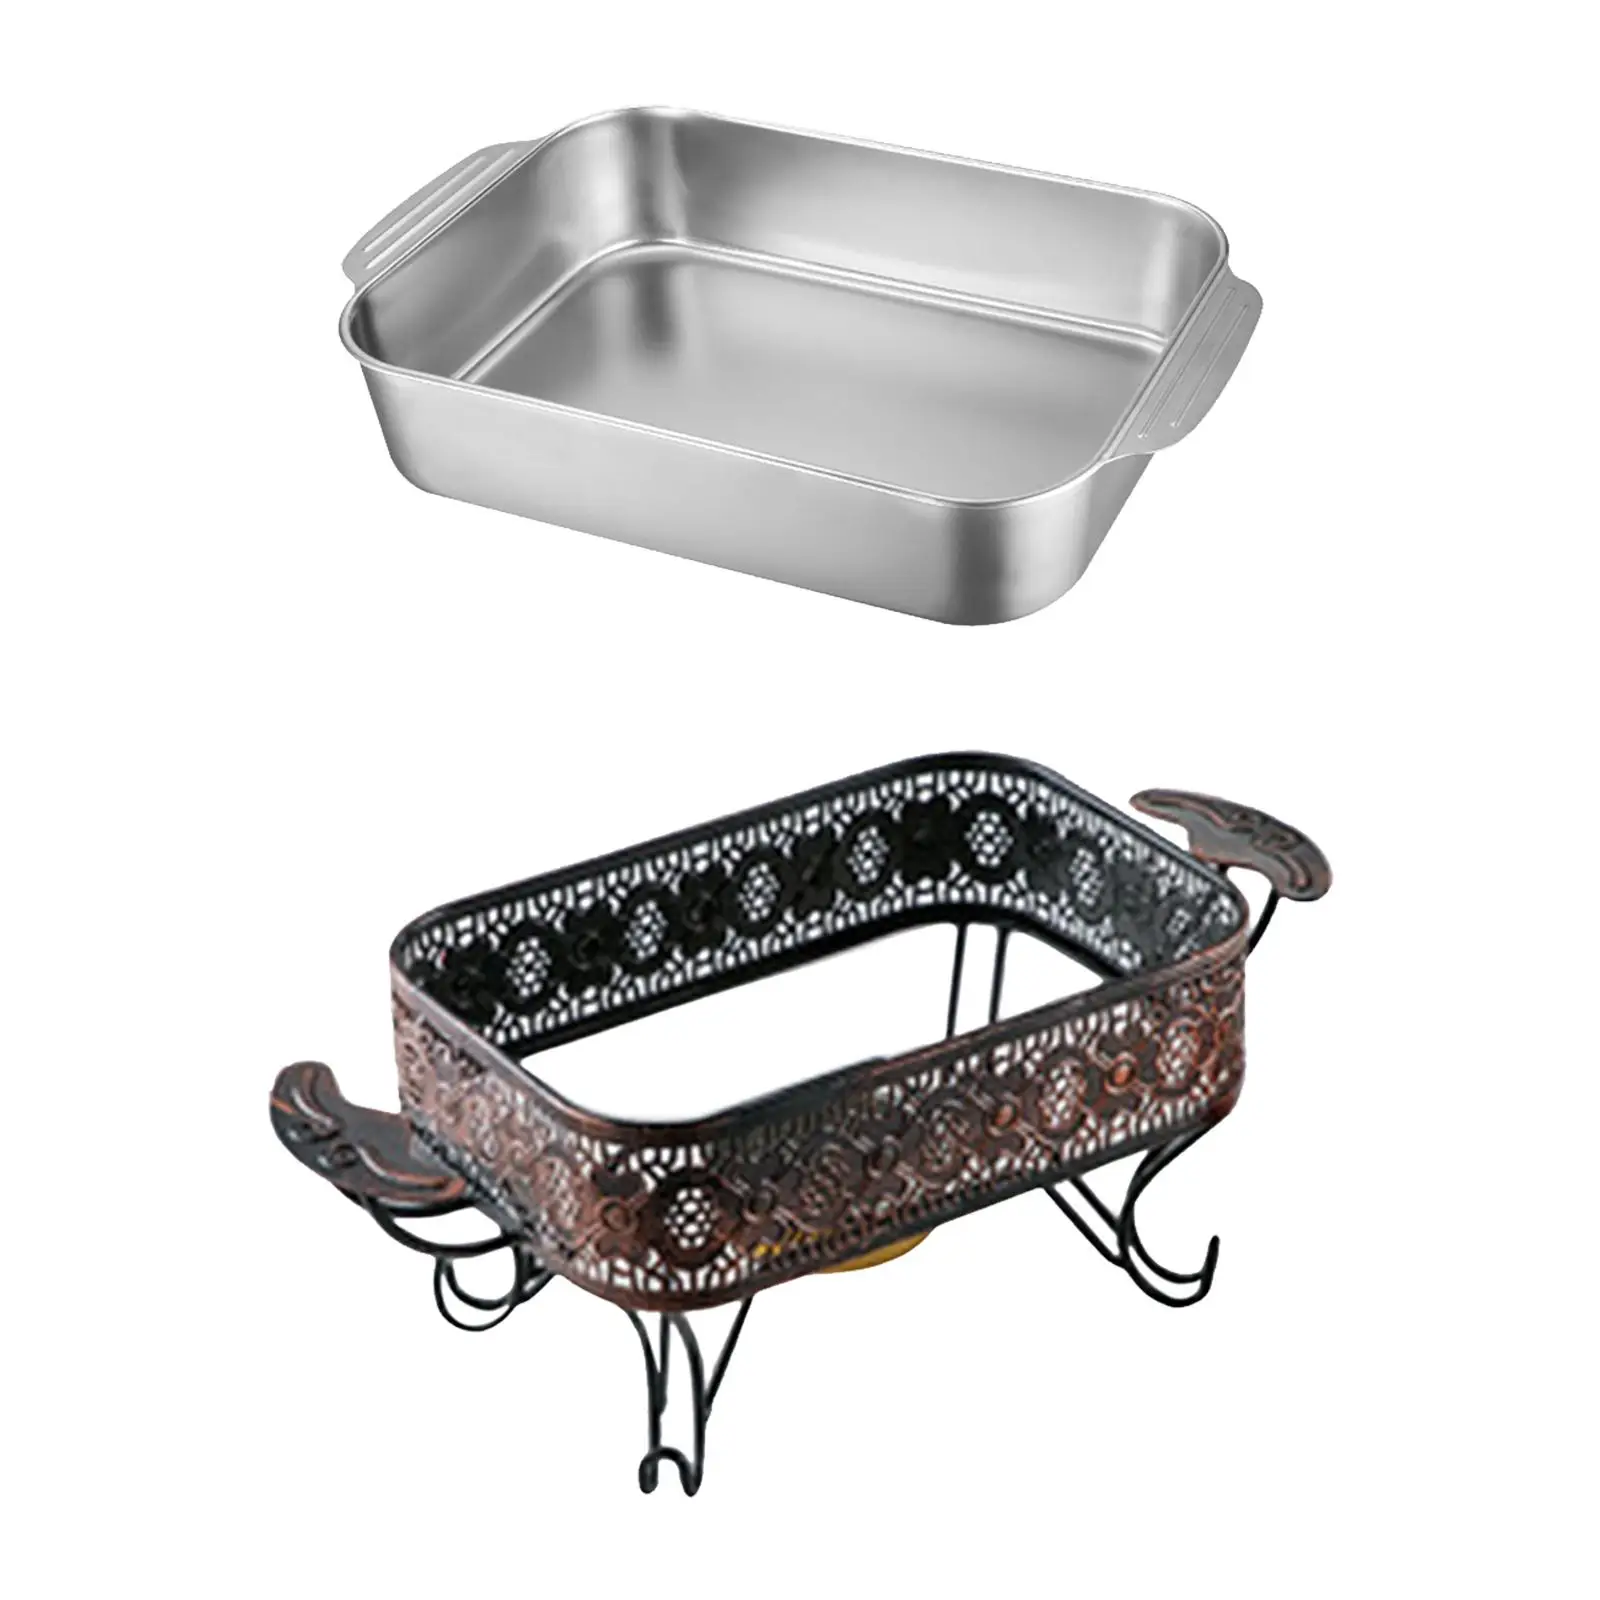 Rectangle Stainless Steel Fish Grill Roasting Pan with Handles Convenient Cleaning Exquisite Craft Brushed Surface Accessories